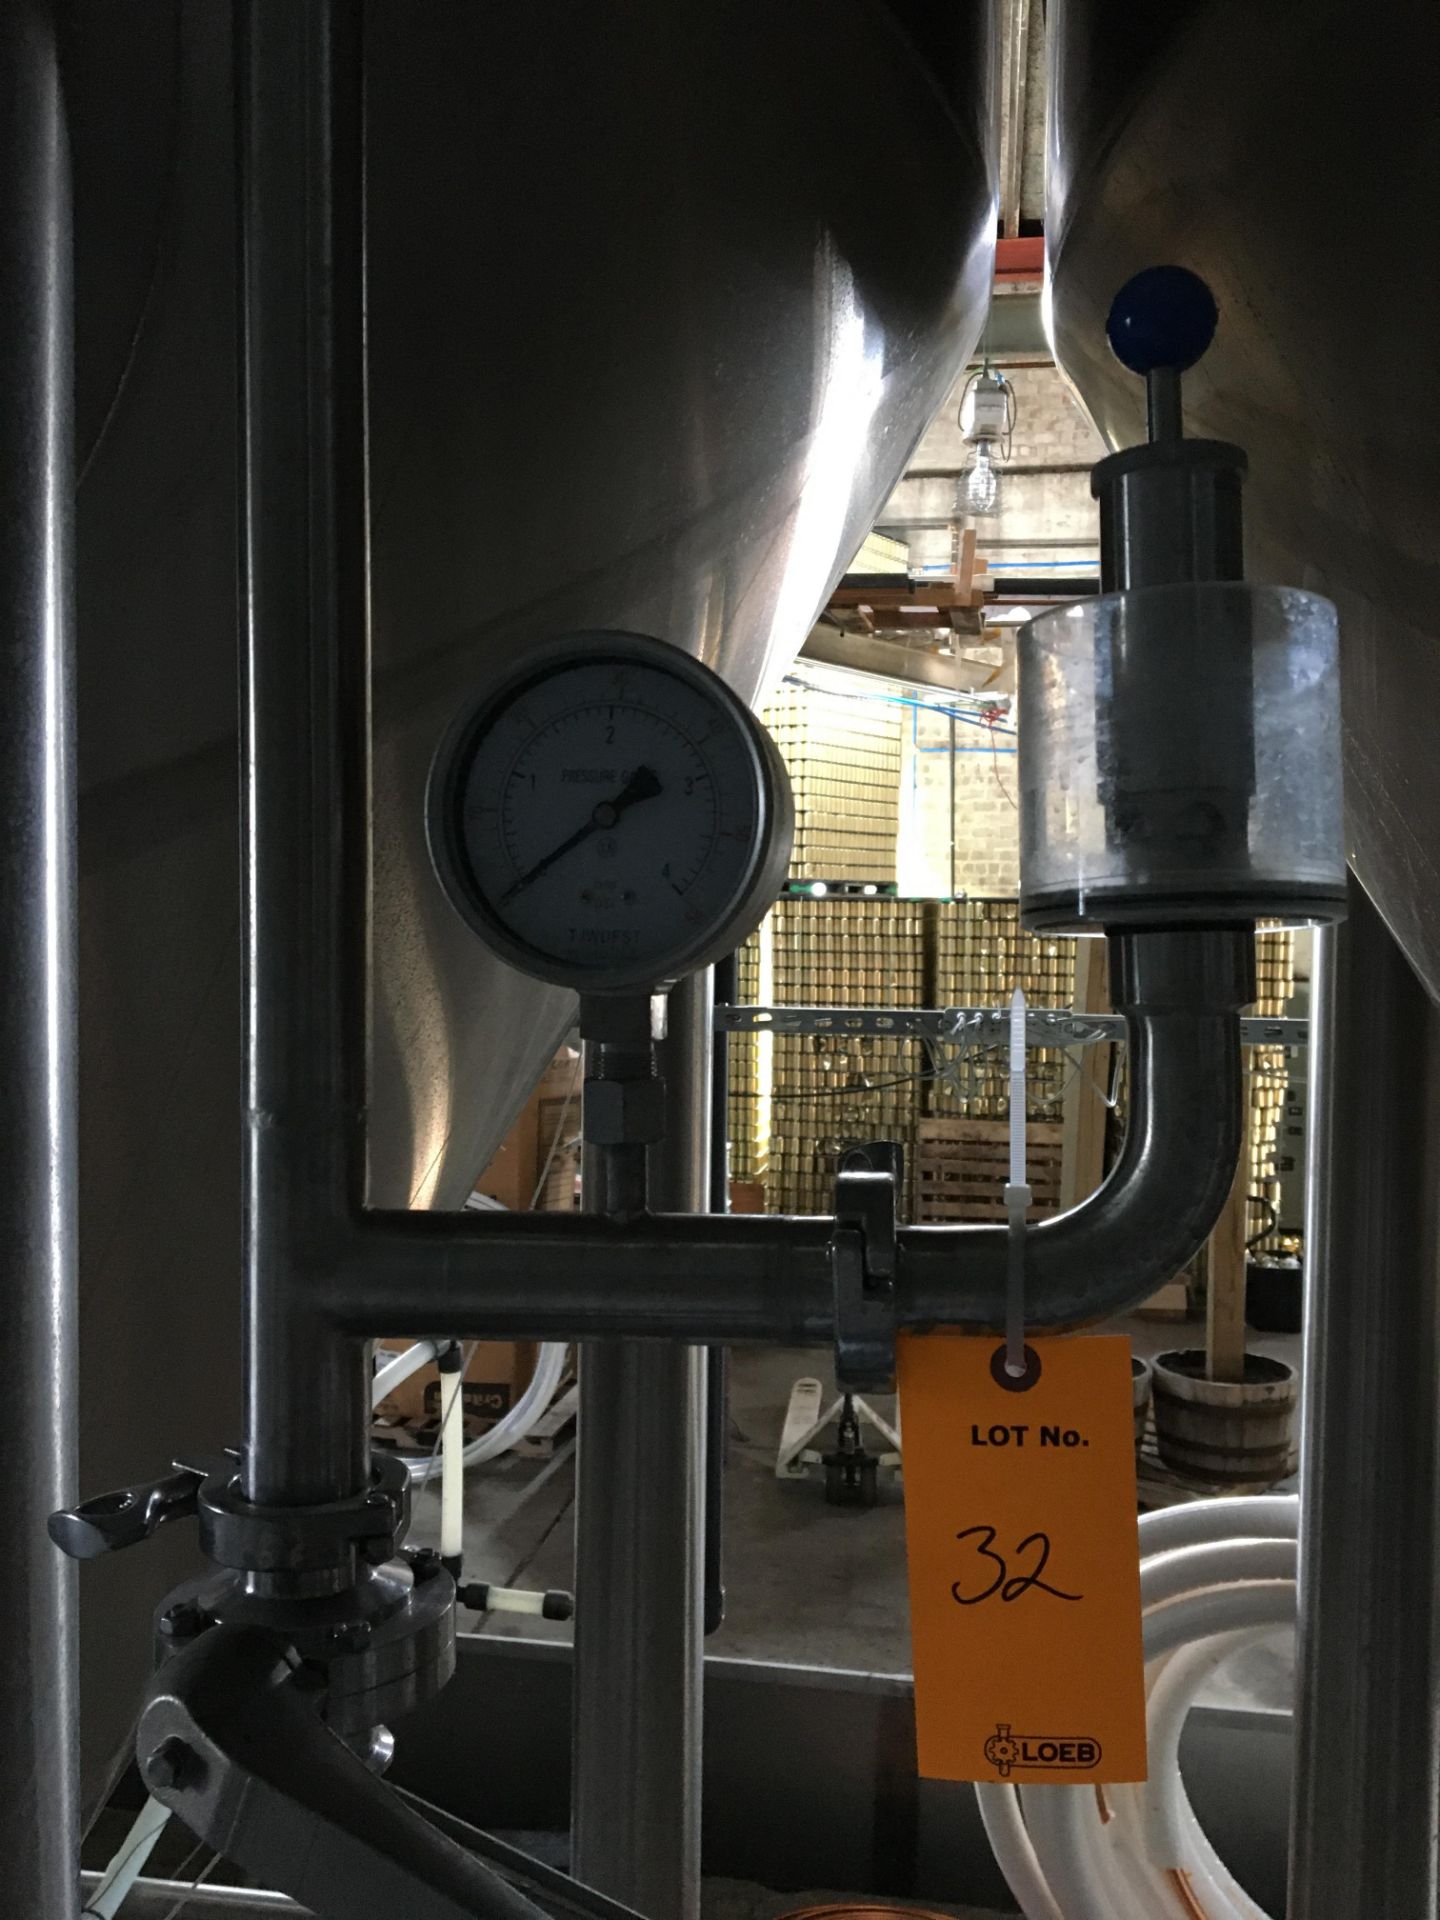 80-BBL Minnetonka Fermentation Tank, Model 80-BBL, Year 2017, Stainless Steel; Vessel store wort and - Image 10 of 15